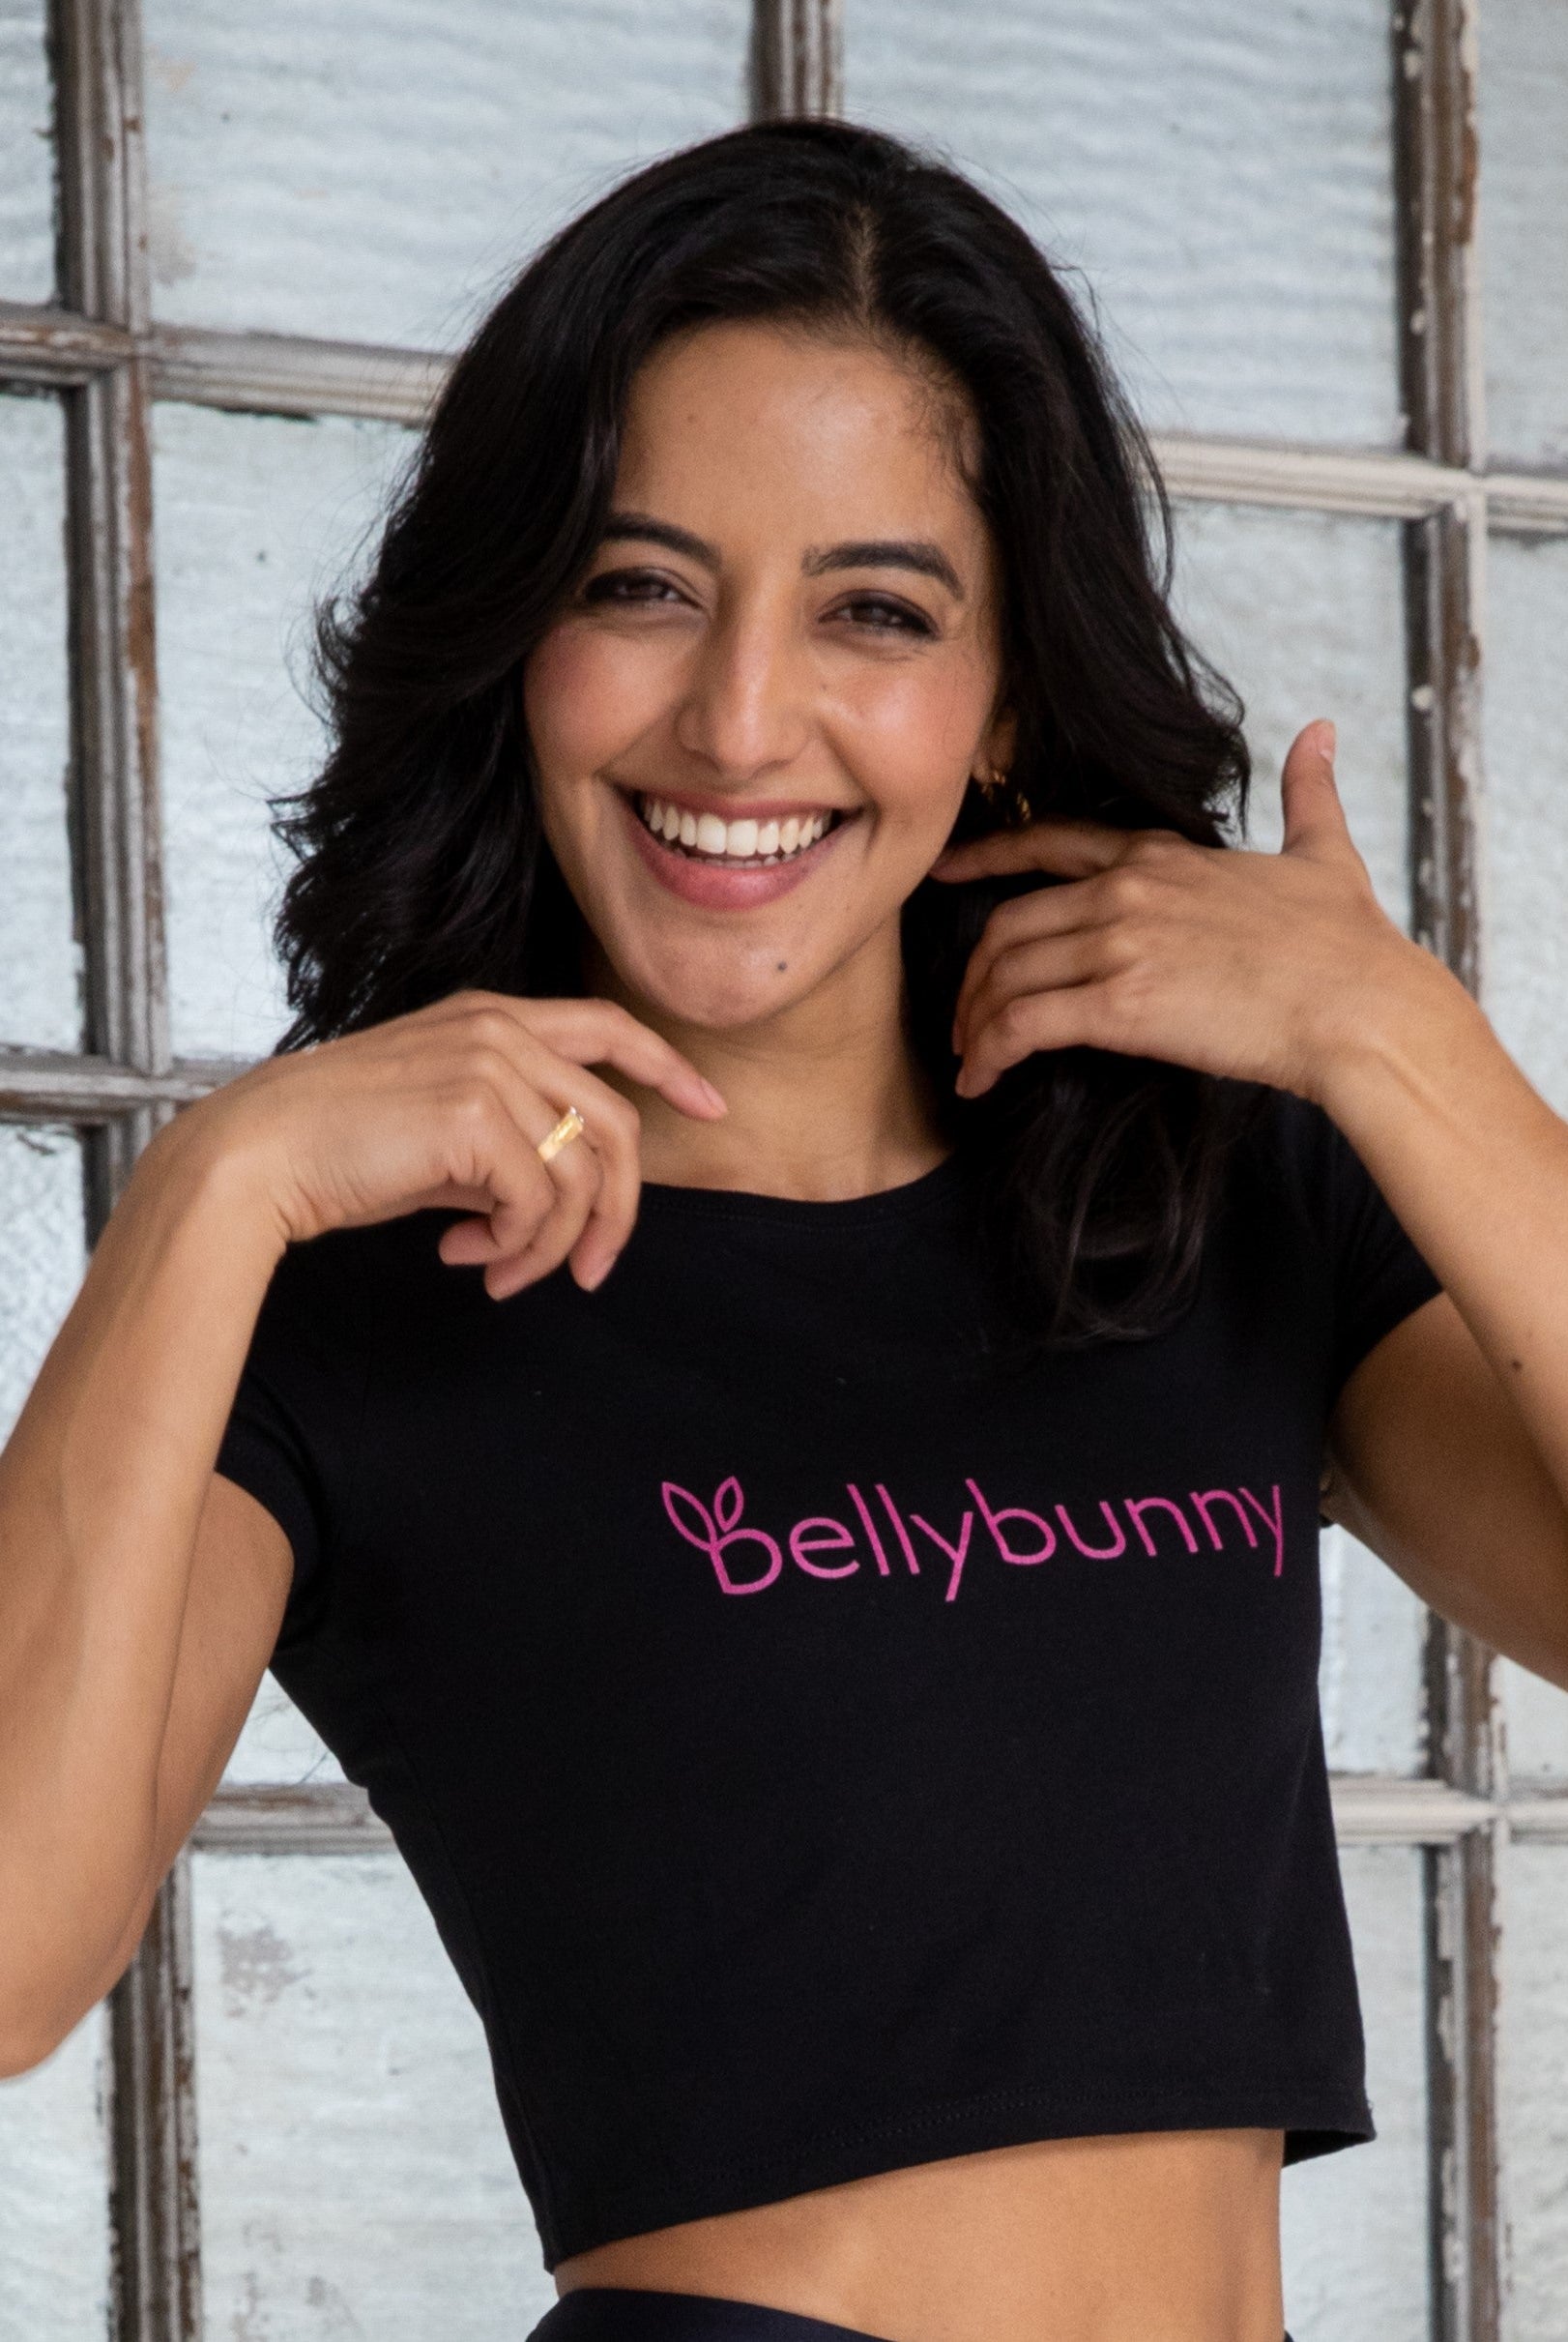 Bellybunny Crop top  black with Pink Logo